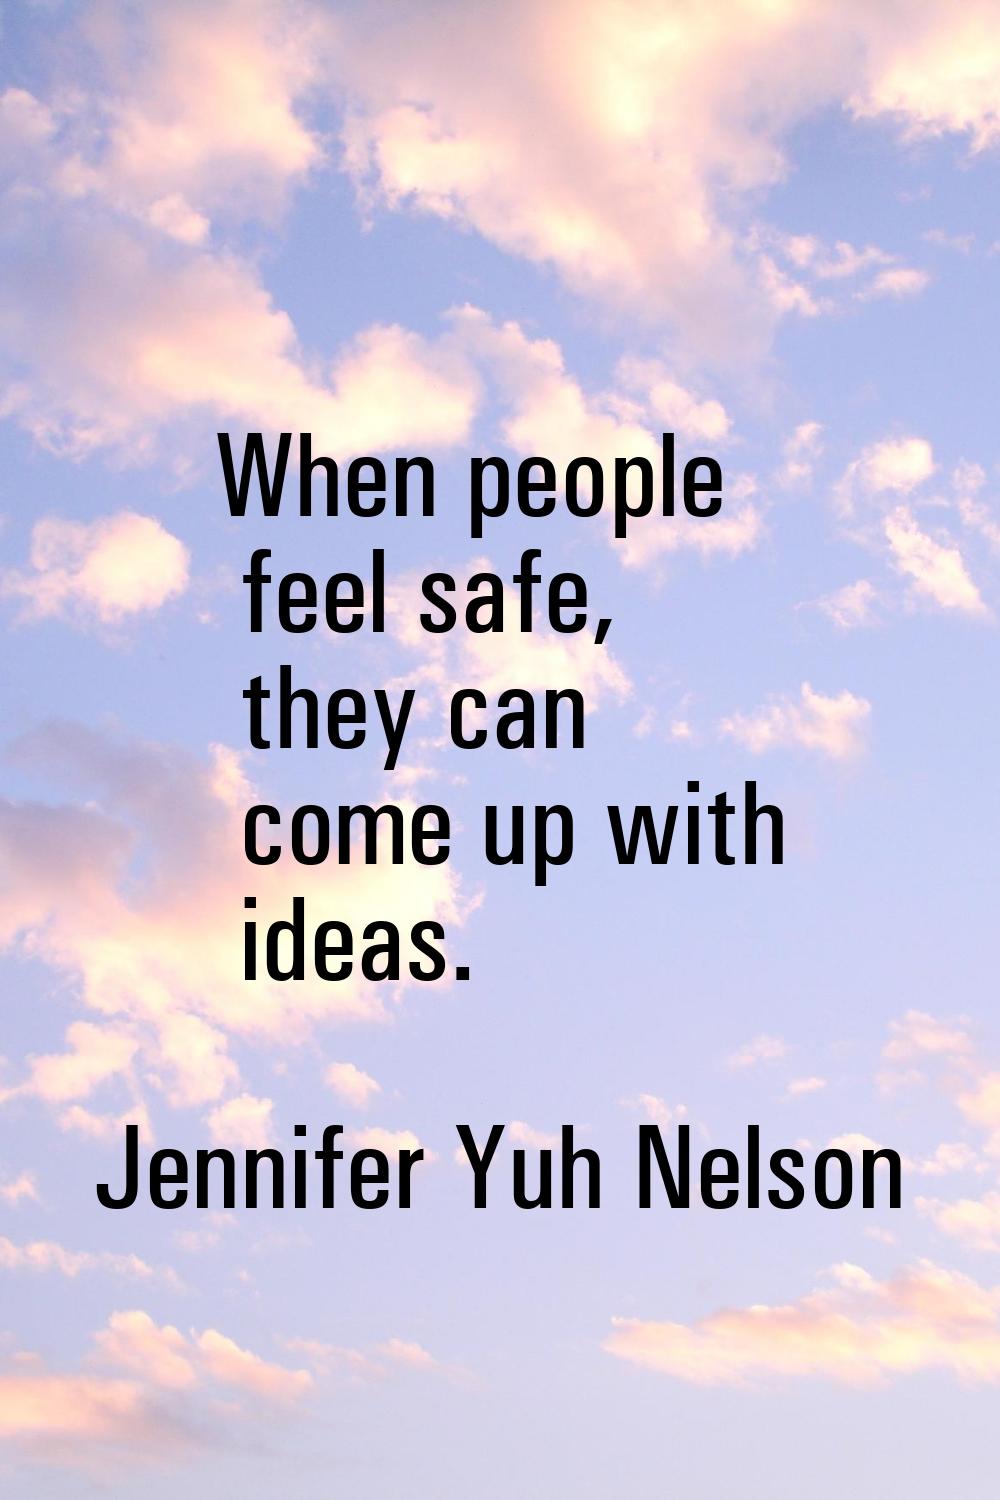 When people feel safe, they can come up with ideas.